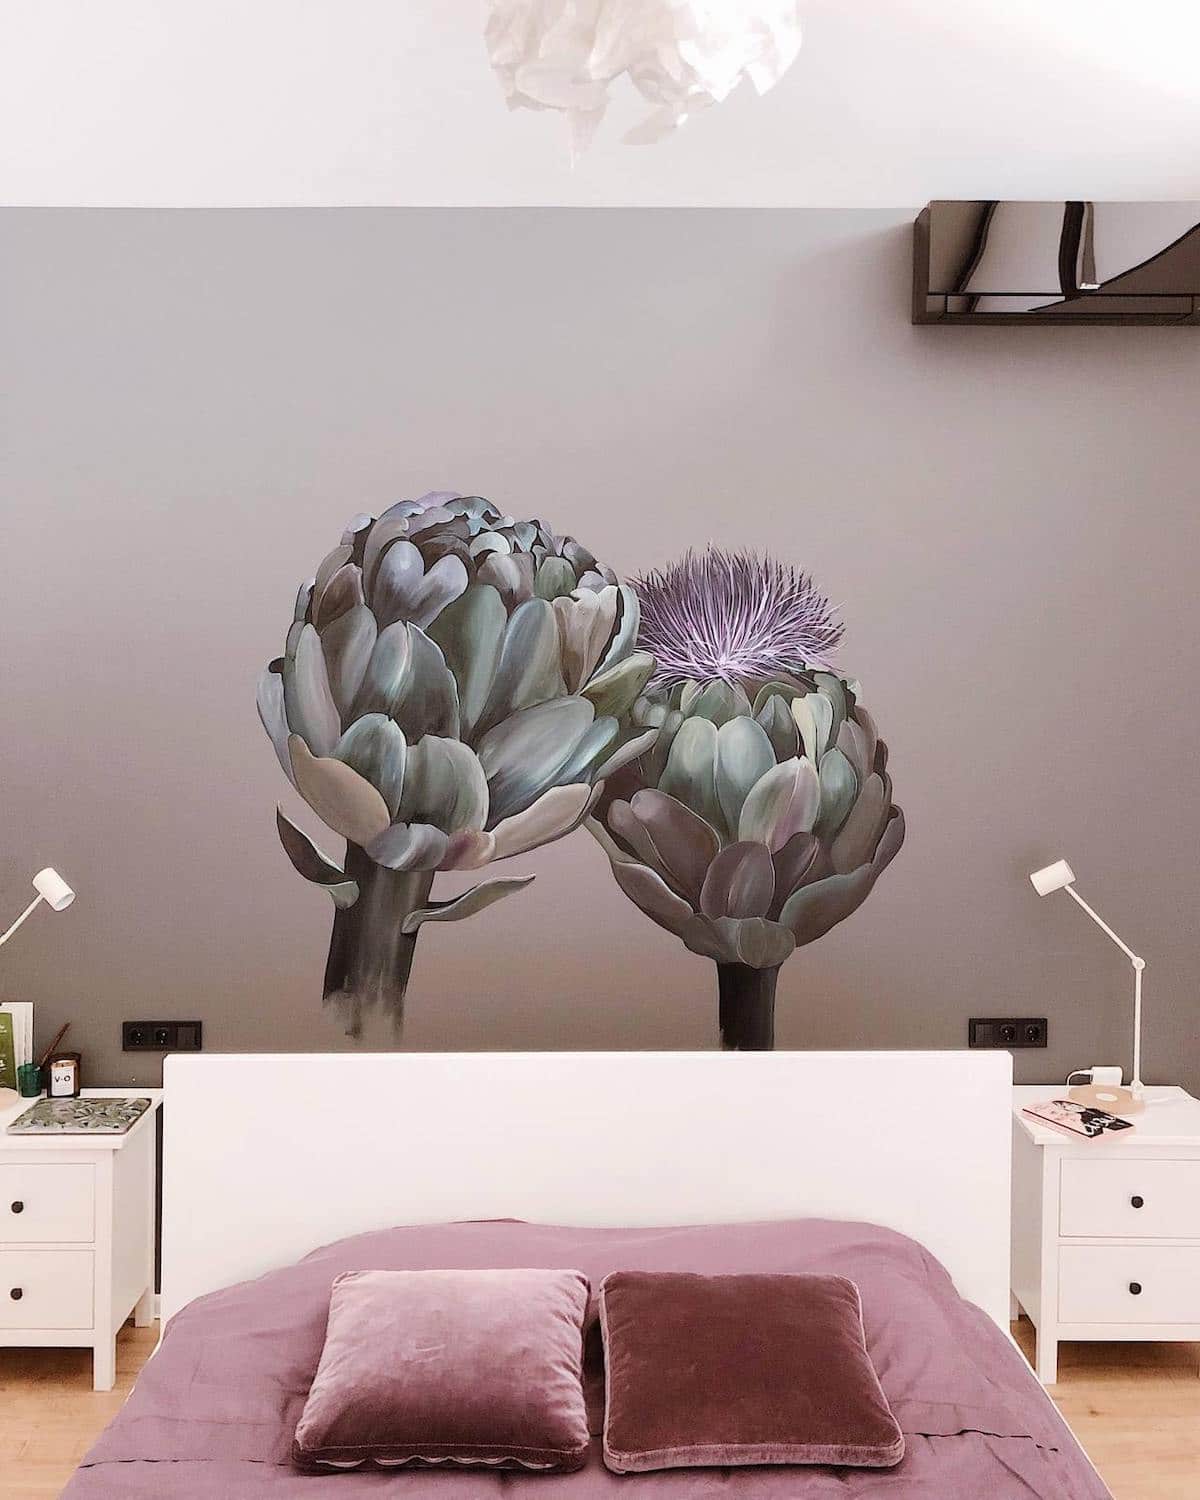 Flower Mural Wall Art by Lilit Sargsyan